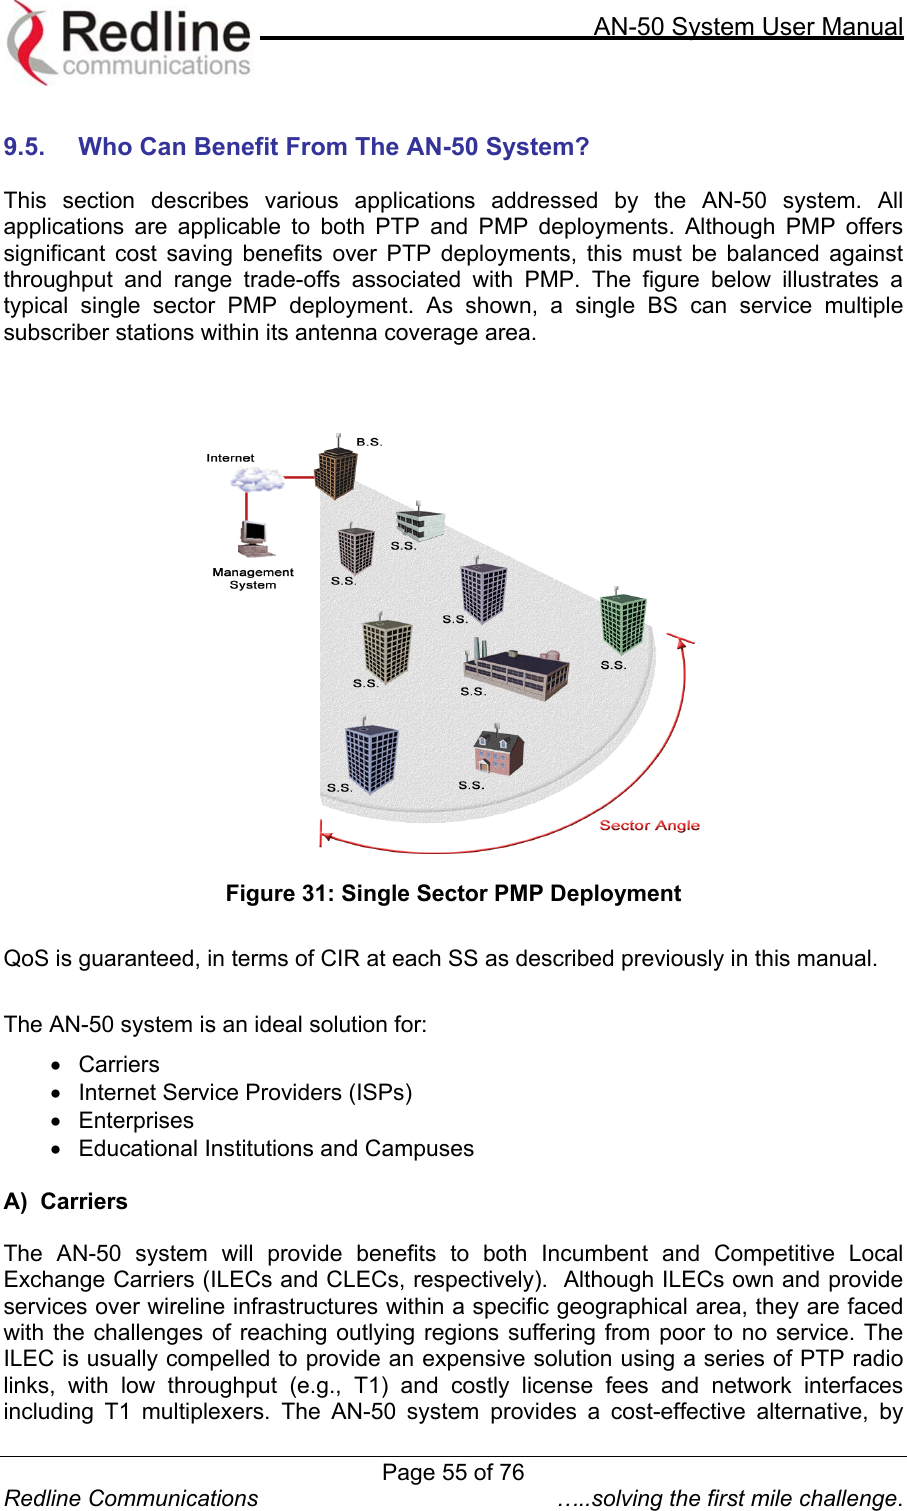     AN-50 System User Manual  Redline Communications  …..solving the first mile challenge.  9.5.  Who Can Benefit From The AN-50 System?  This section describes various applications addressed by the AN-50 system. All applications are applicable to both PTP and PMP deployments. Although PMP offers significant cost saving benefits over PTP deployments, this must be balanced against throughput and range trade-offs associated with PMP. The figure below illustrates a typical single sector PMP deployment. As shown, a single BS can service multiple subscriber stations within its antenna coverage area.           Figure 31: Single Sector PMP Deployment  QoS is guaranteed, in terms of CIR at each SS as described previously in this manual.  The AN-50 system is an ideal solution for: •  Carriers  •  Internet Service Providers (ISPs) •  Enterprises •  Educational Institutions and Campuses    A)  Carriers  The AN-50 system will provide benefits to both Incumbent and Competitive Local Exchange Carriers (ILECs and CLECs, respectively).  Although ILECs own and provide services over wireline infrastructures within a specific geographical area, they are faced with the challenges of reaching outlying regions suffering from poor to no service. The ILEC is usually compelled to provide an expensive solution using a series of PTP radio links, with low throughput (e.g., T1) and costly license fees and network interfaces including T1 multiplexers. The AN-50 system provides a cost-effective alternative, by Page 55 of 76